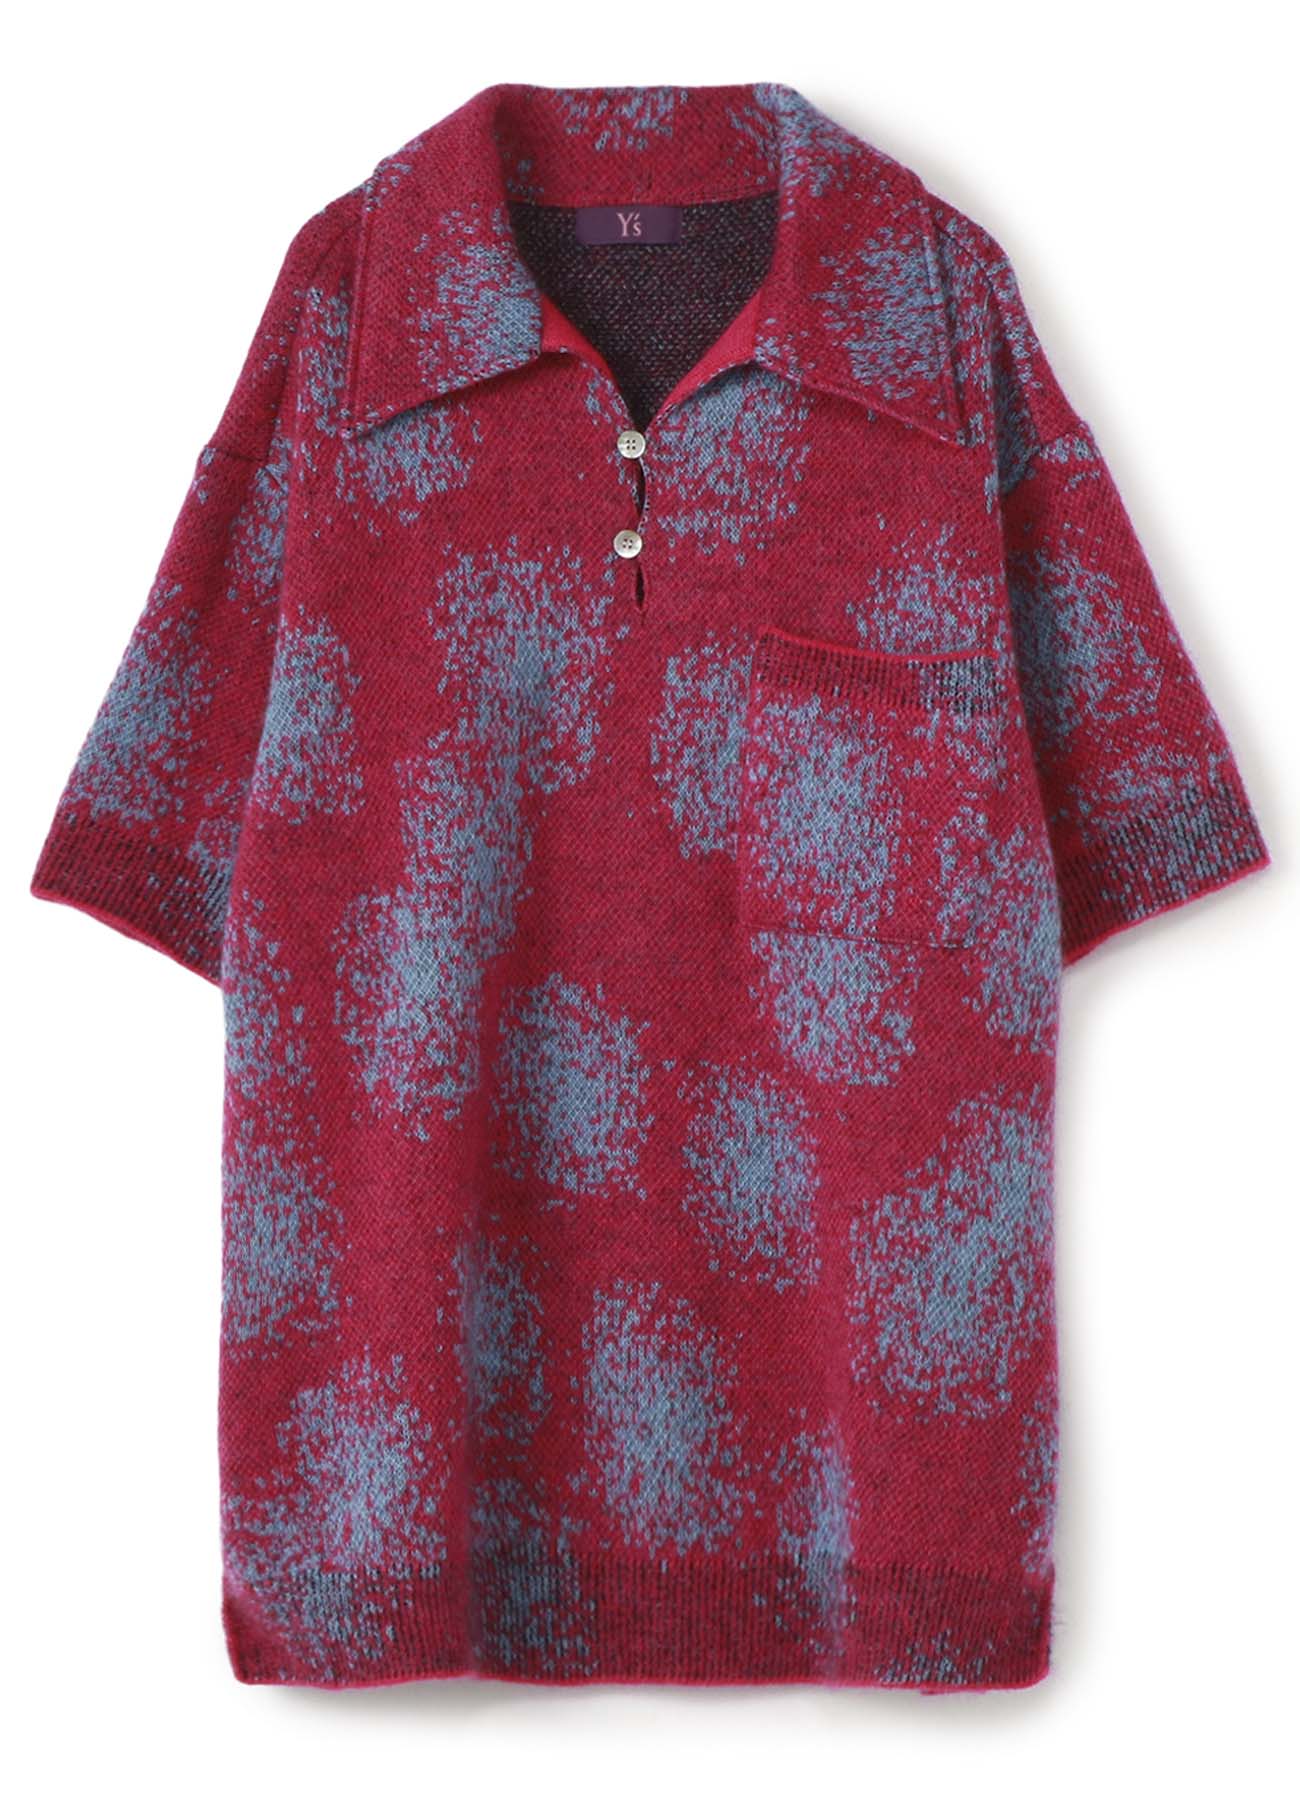 Y'sPINK MOHAIR JACQUARD POLO SHIRT